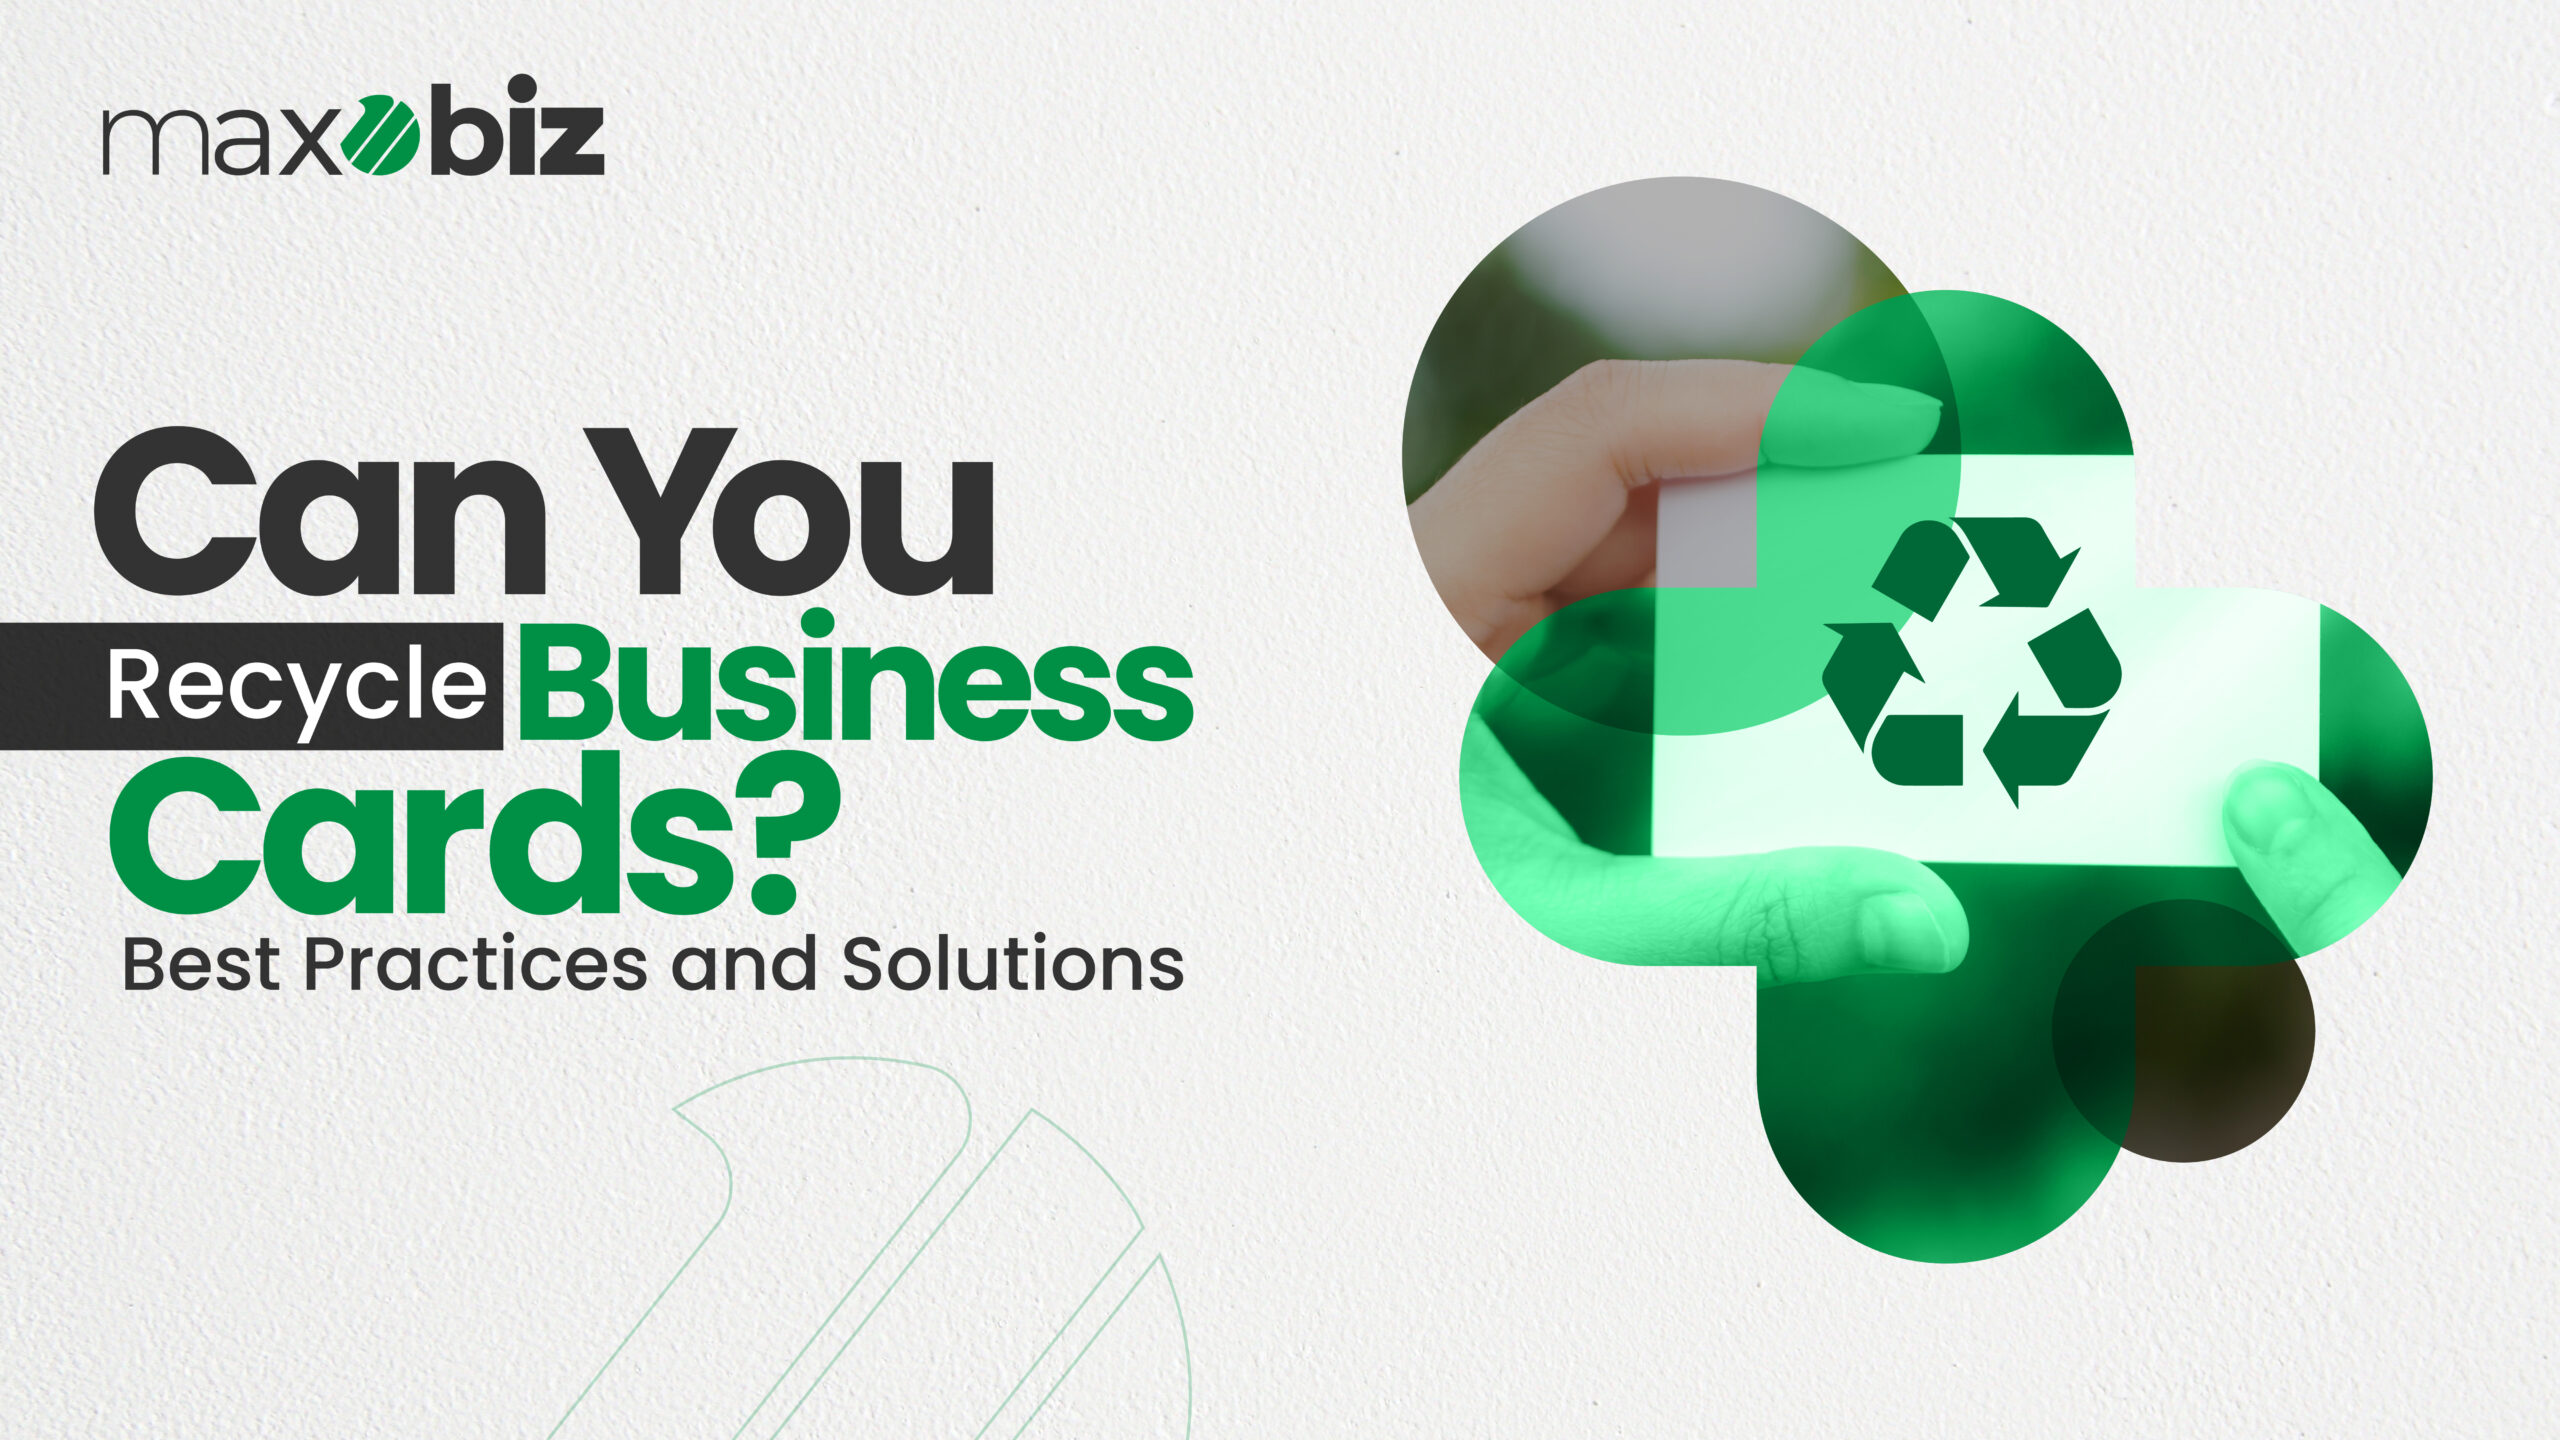 Can You Recycle Business Cards?